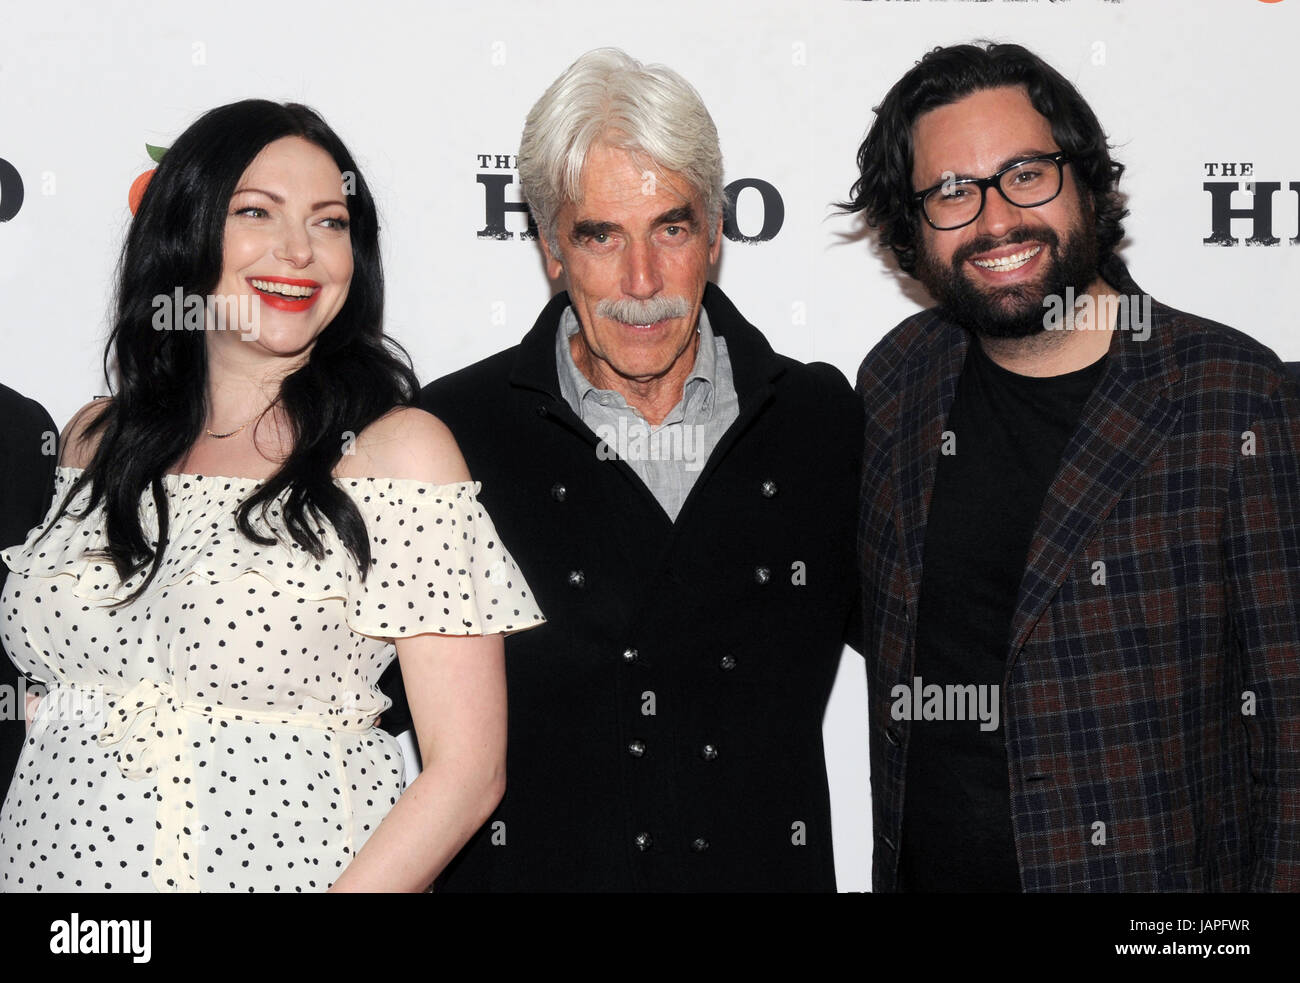 New York, NY, USA. 07th June, 2017. Laura Prepon, Sam Elliott and Brett Haley at 'The Hero' New York Premiere at the Whitby Hotel on June 7, 2017 in New York City. Credit: John Palmer/Media Punch/Alamy Live News Stock Photo